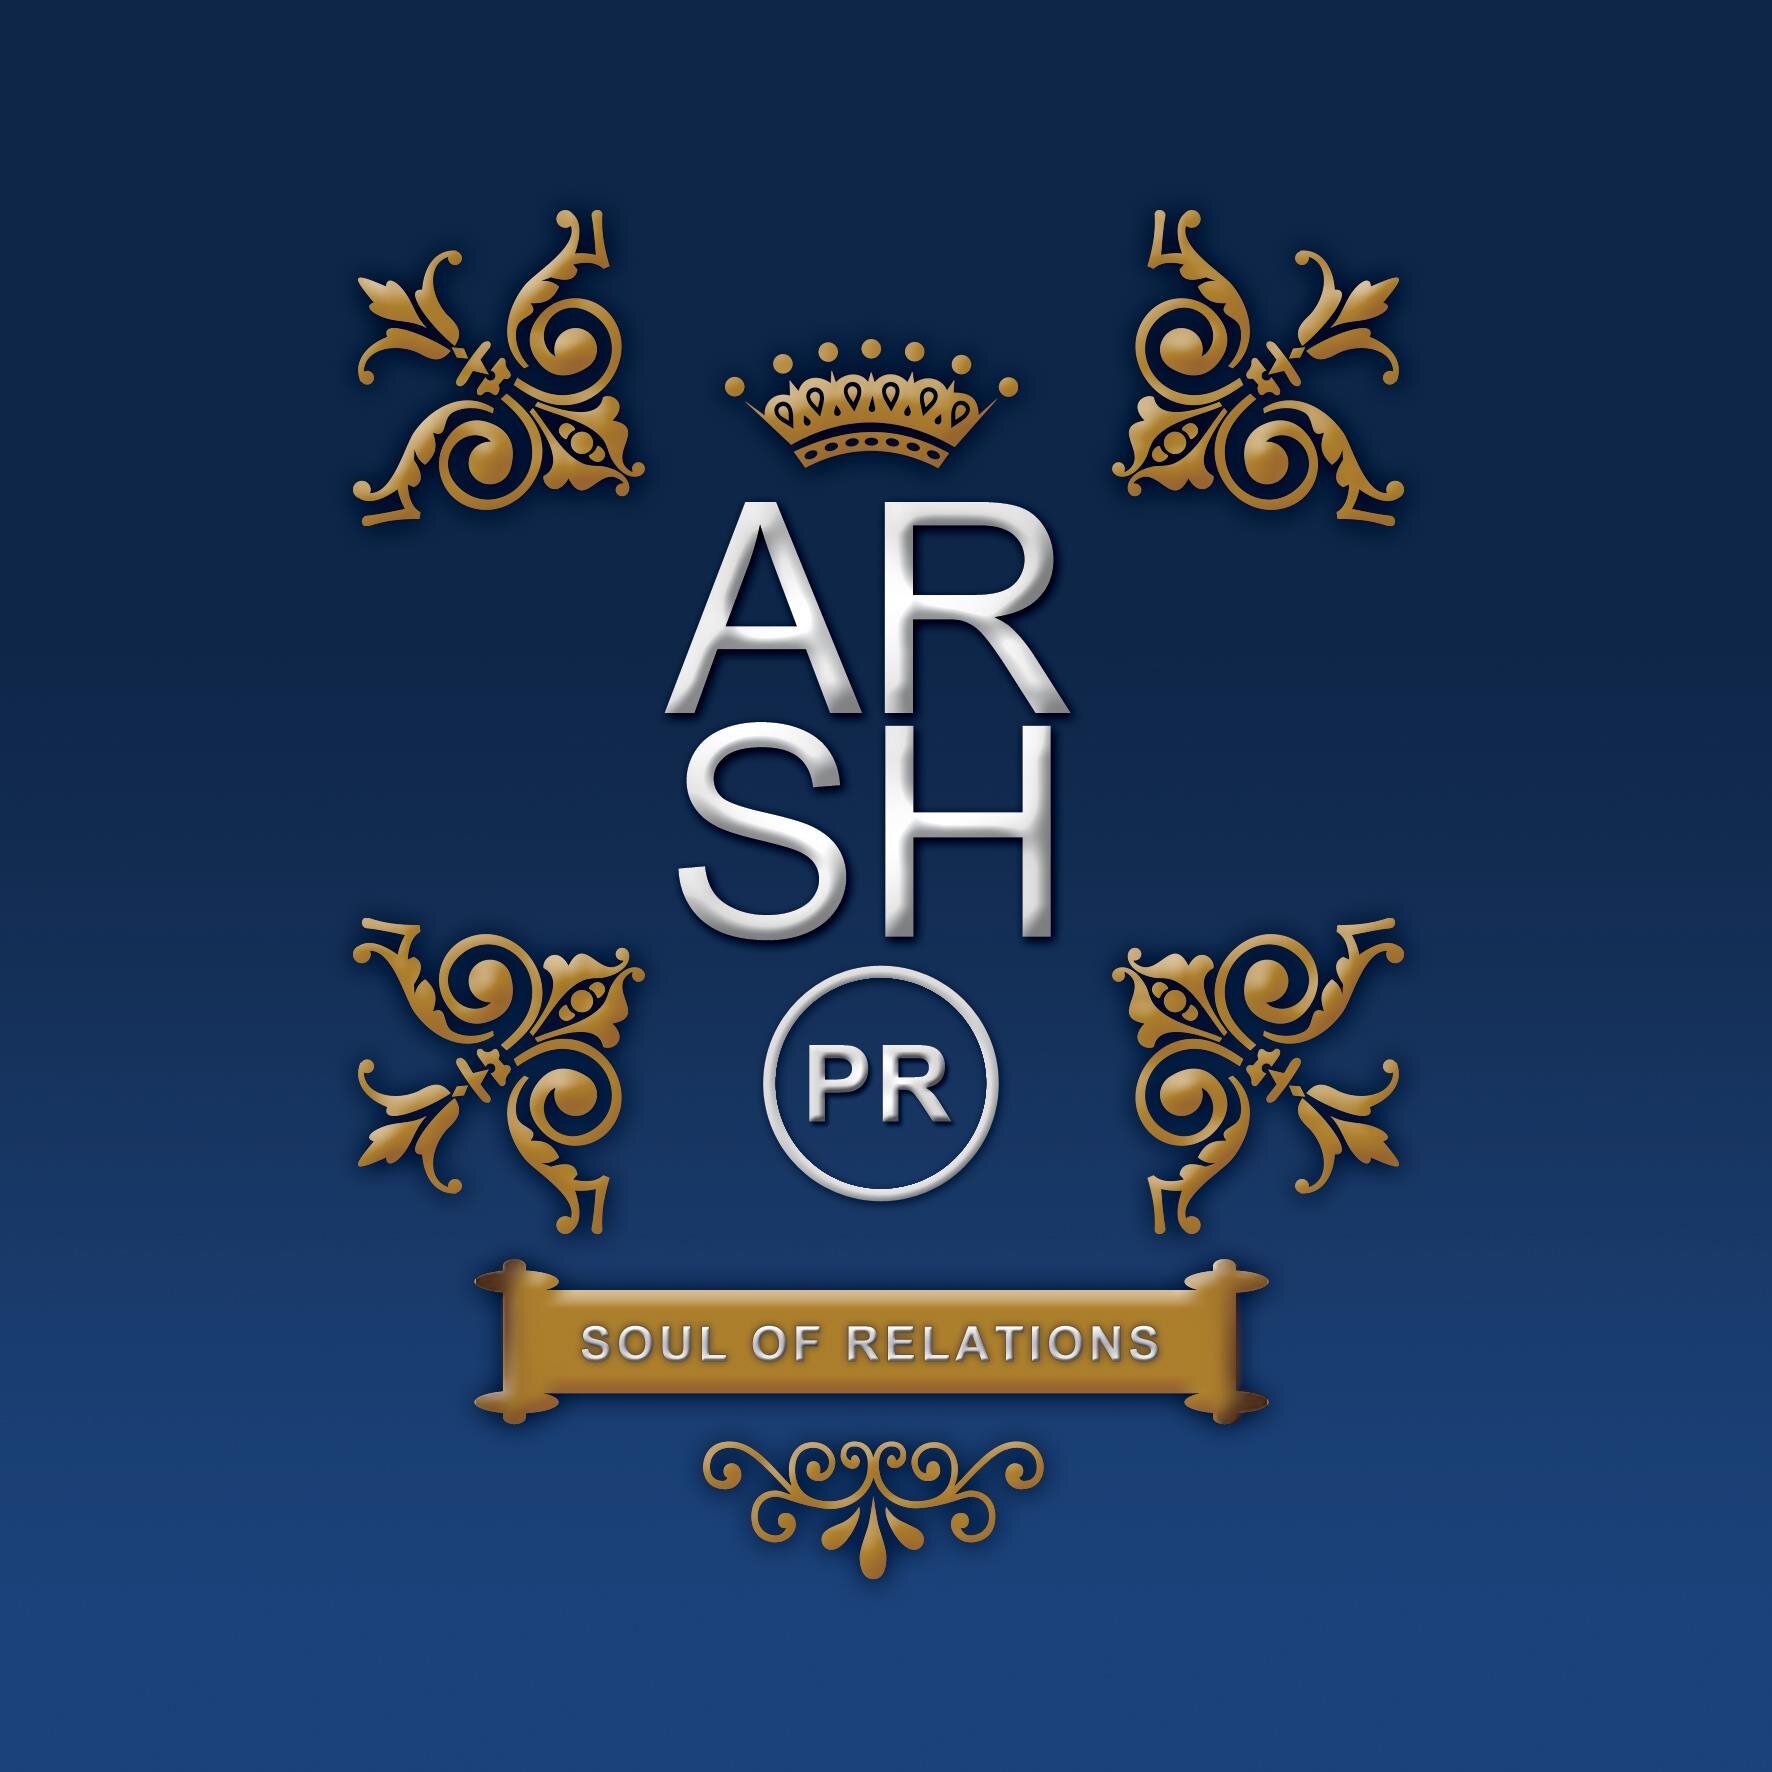 Arsh PR executes a multi-faceted marketing platform designed to generate lifestyle, industry and business media coverage on local, national and global levels.